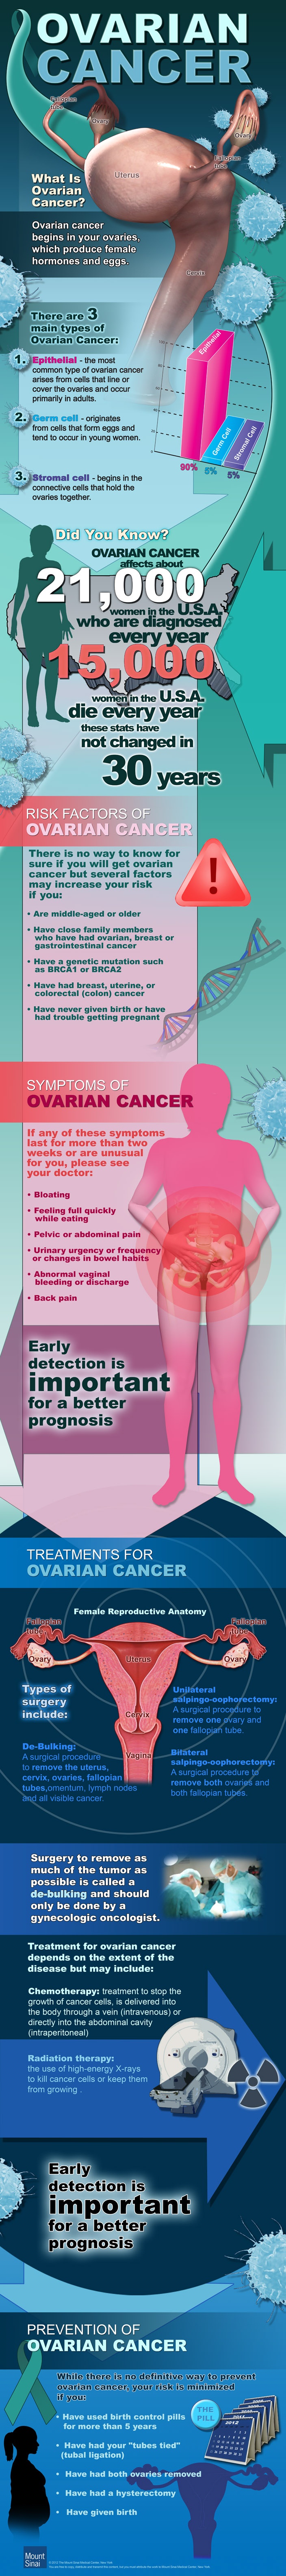 InfoGraphic on Ovarian Cancer